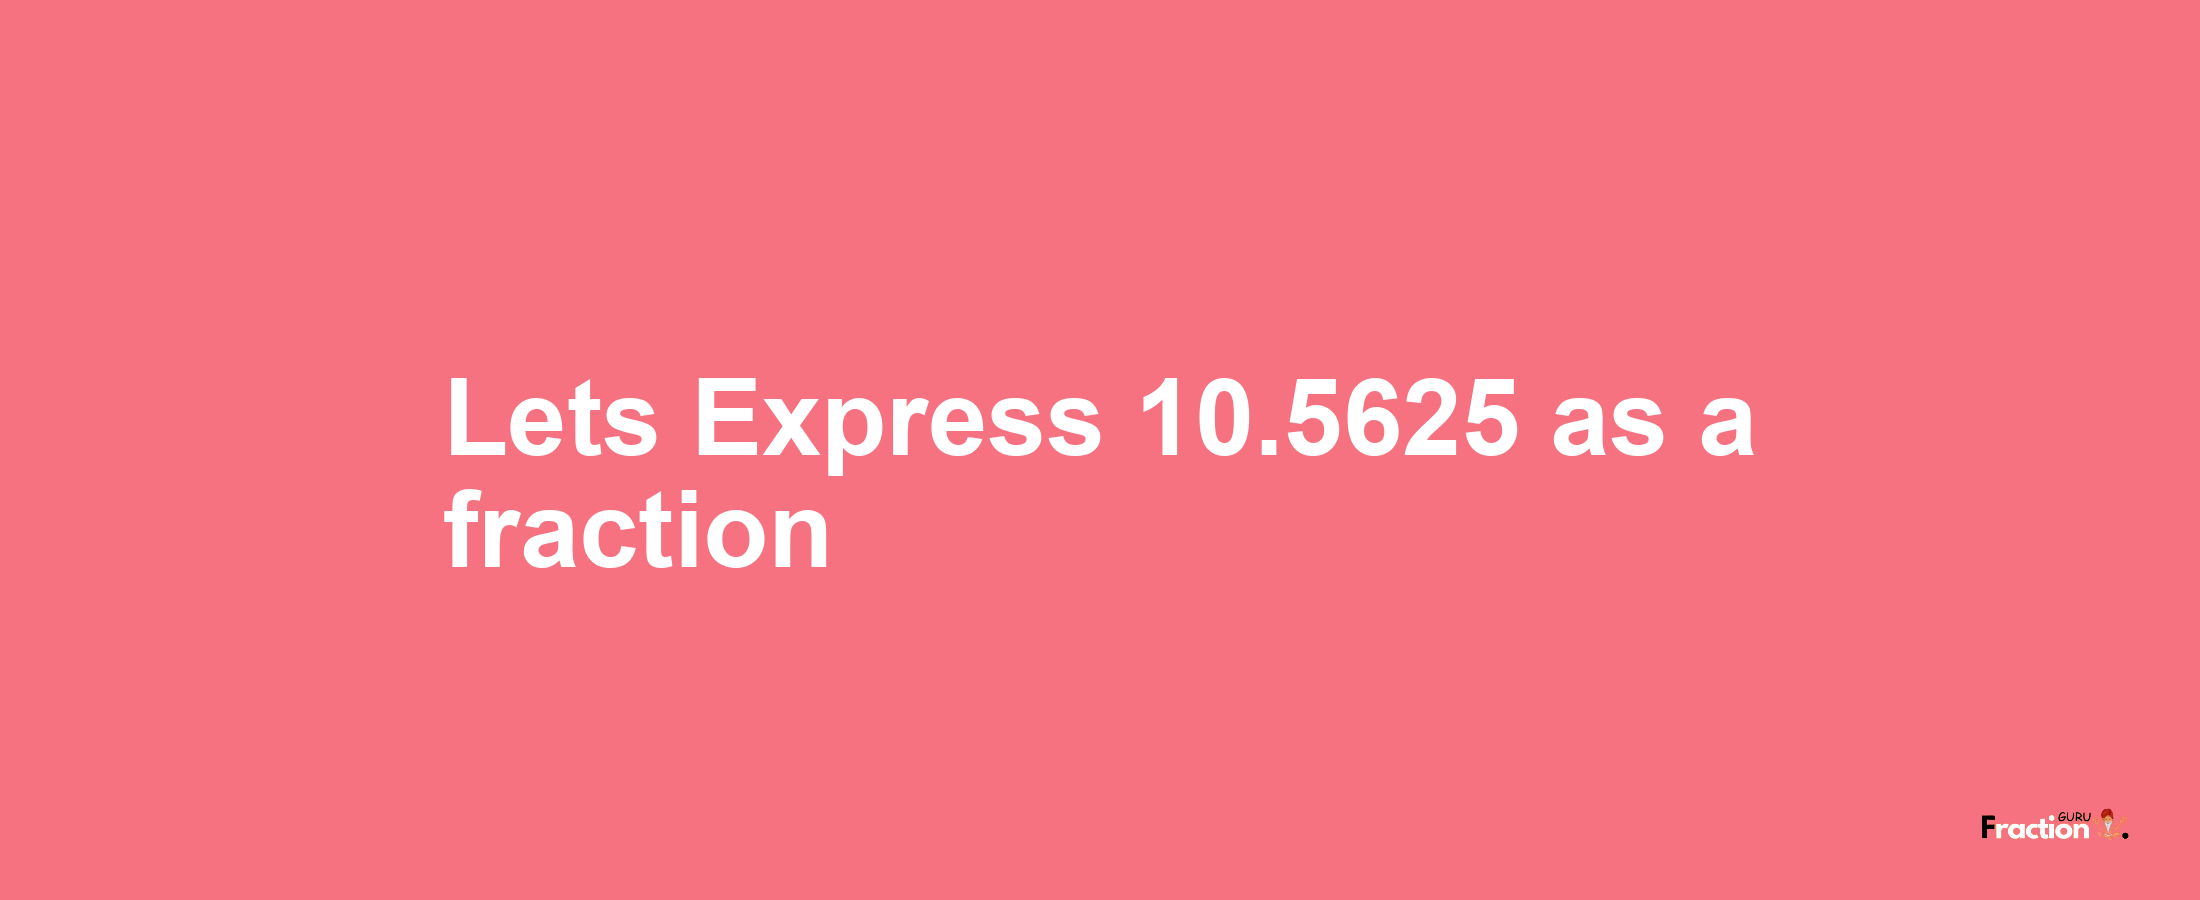 Lets Express 10.5625 as afraction